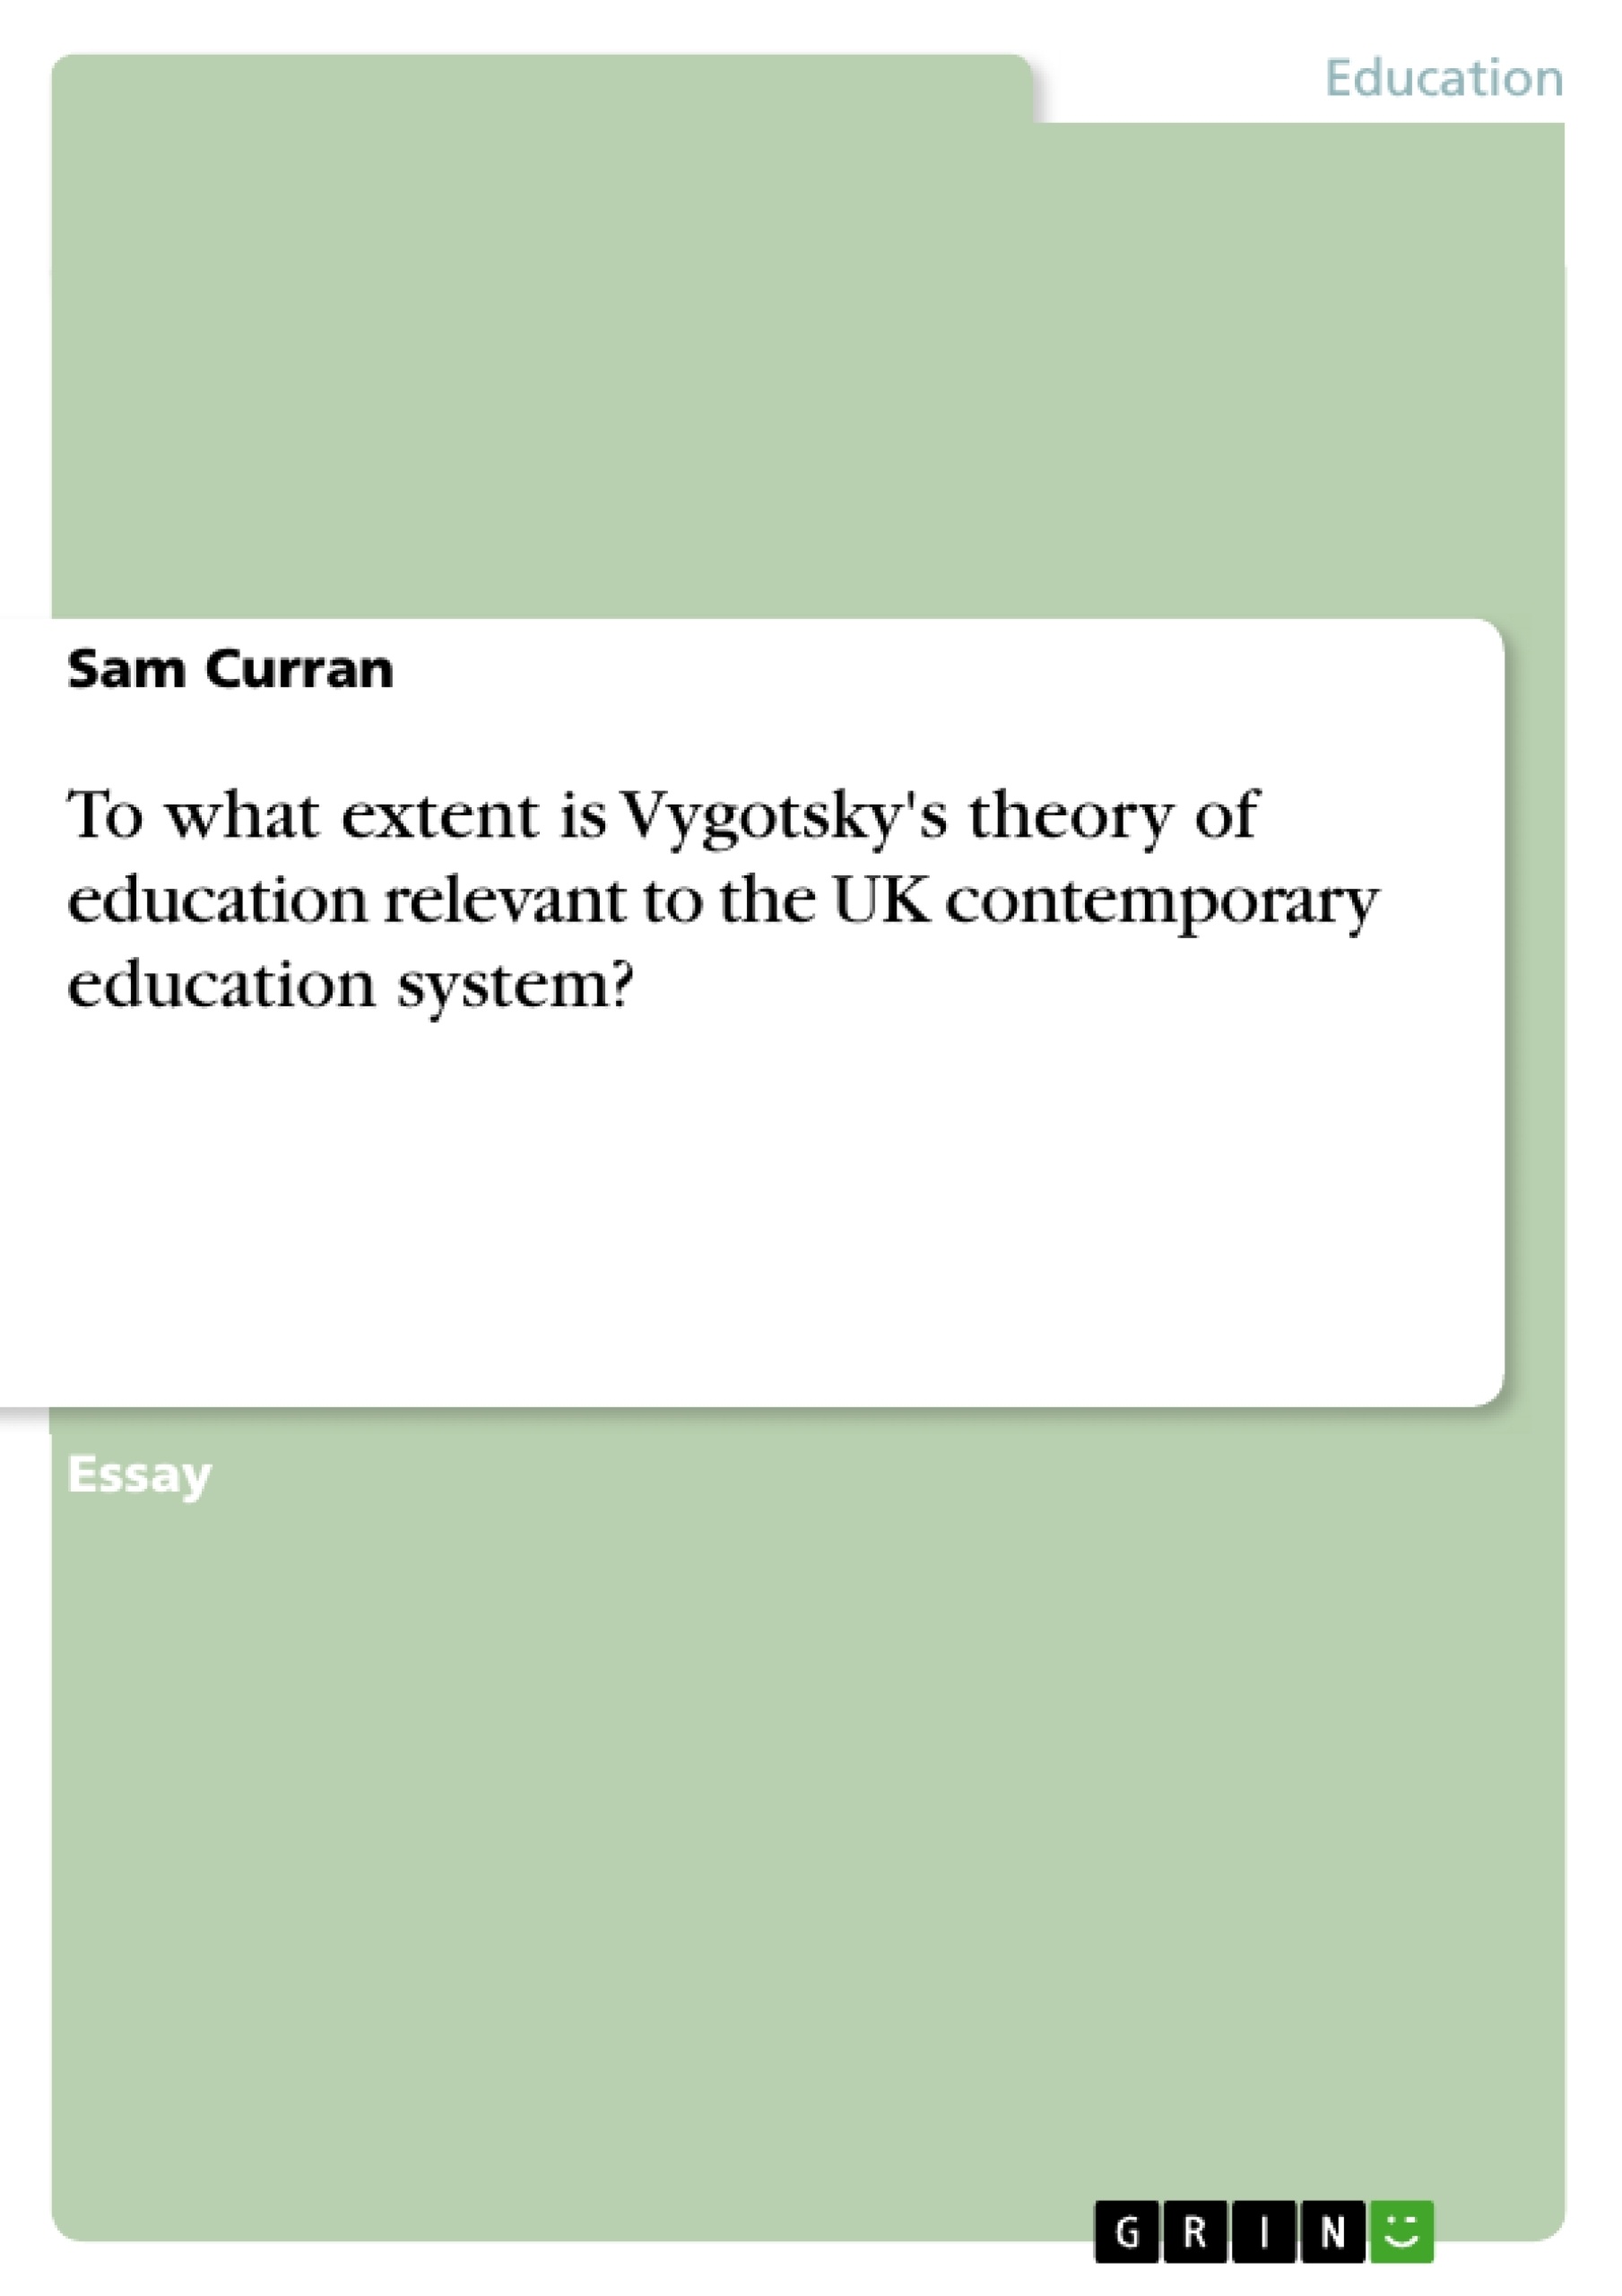 Titre: To what extent is Vygotsky's theory of education relevant to the UK contemporary education system?